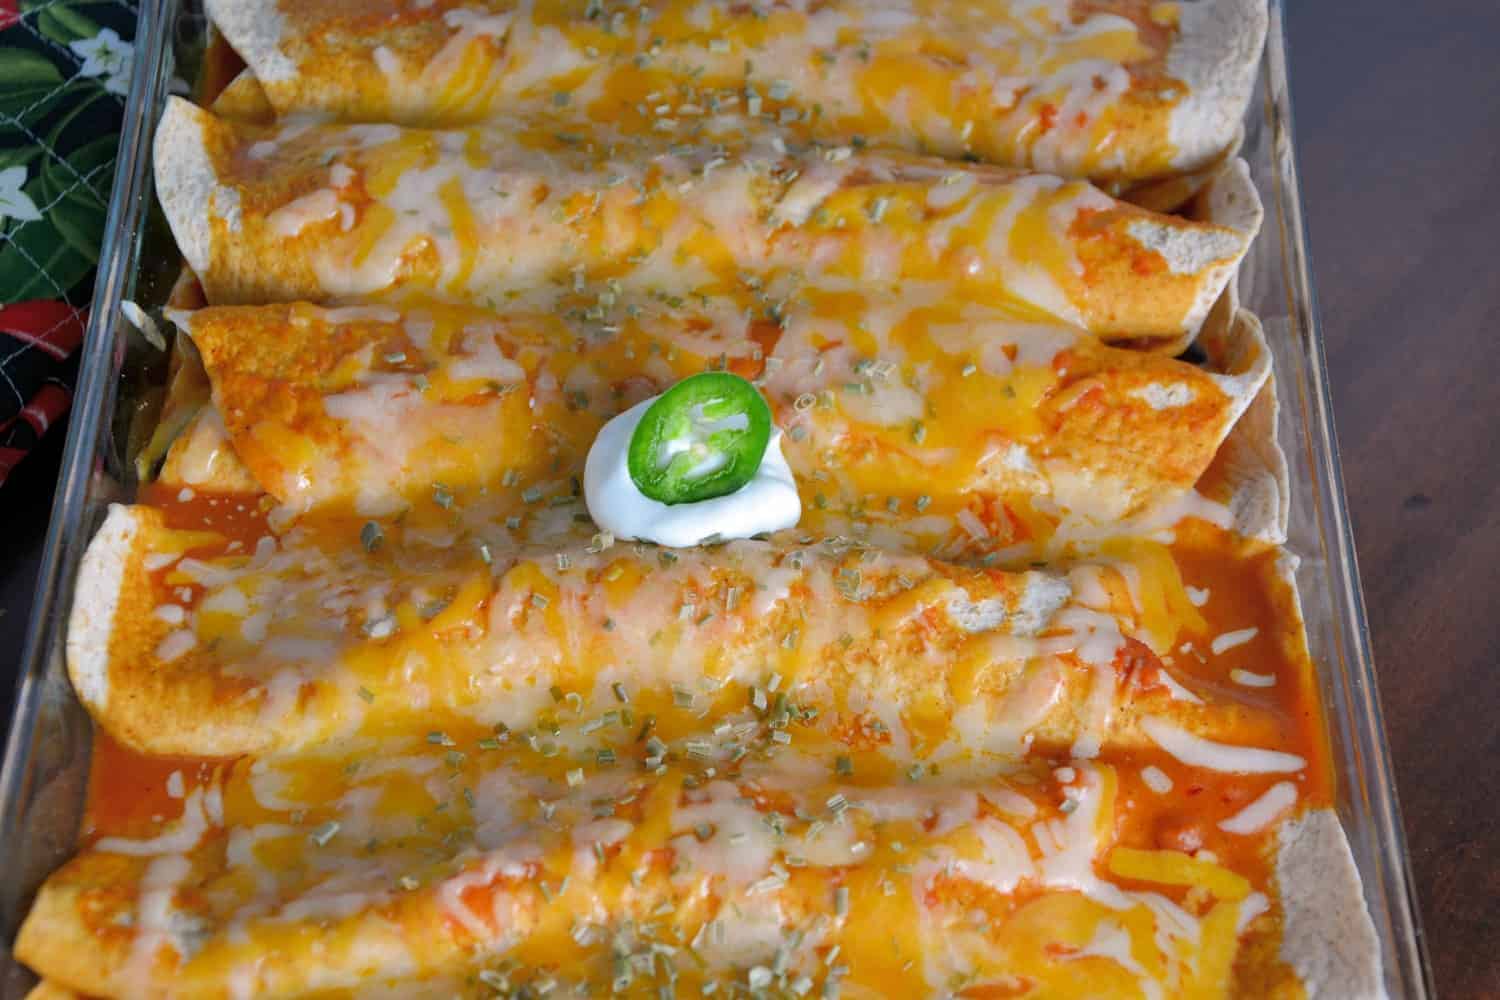 These Spinach, Black Bean and Chicken Enchiladas are rolled in flour tortillas, covered in a delicious homemade sauce and smothered in gooey cheese! Using pre-made rotisserie chicken makes them ready in a snap!